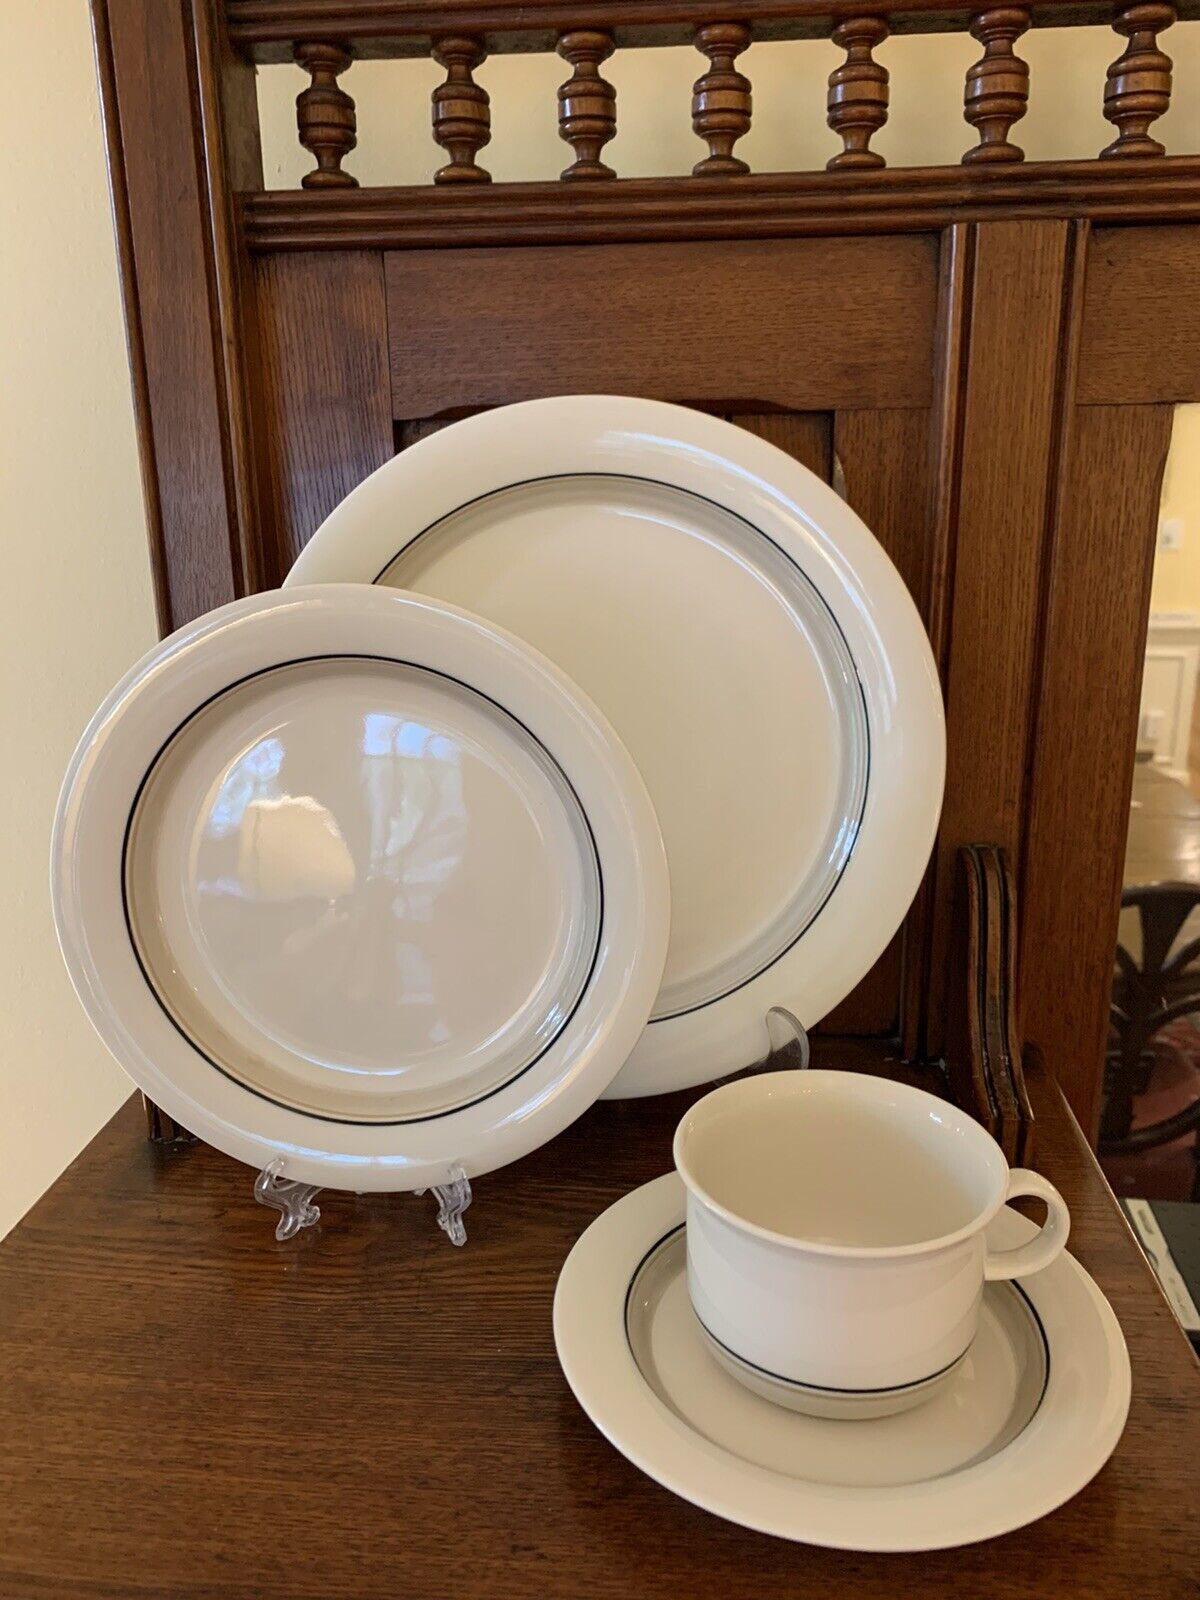 Read more about the article Arabia Finland Seita Arctica 4 piece Place Setting: Dinner Salad Cup/Saucer Used